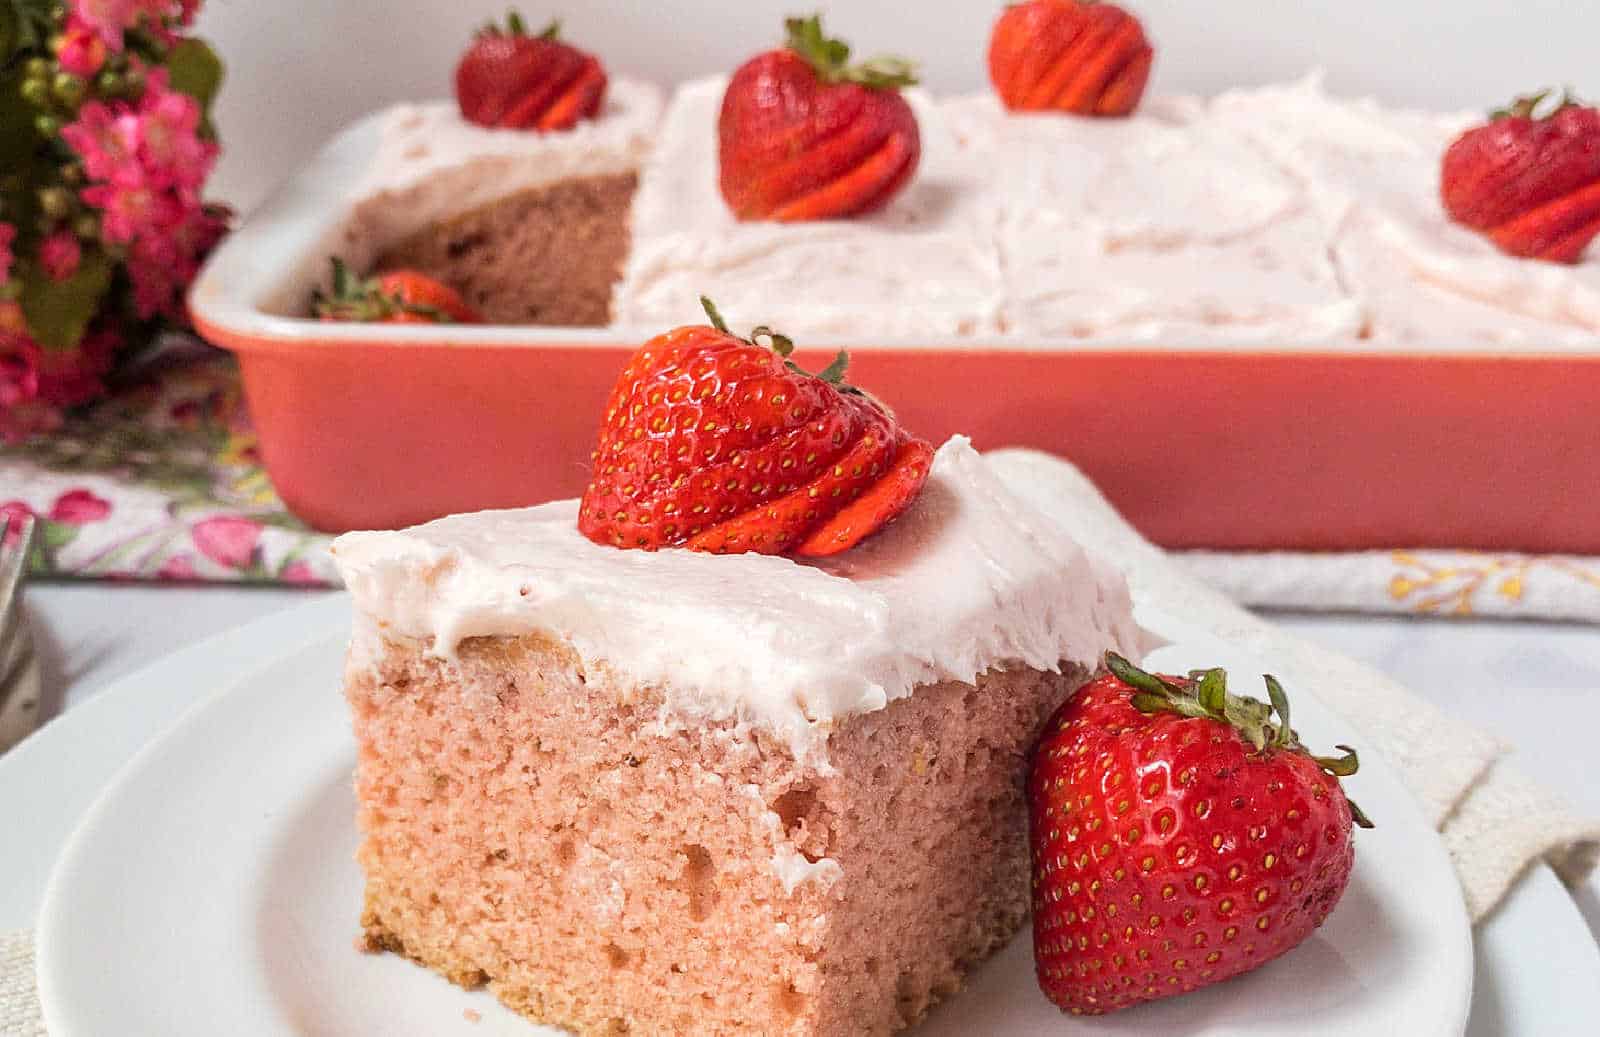 A slice of homemade strawberry cake with icing and strawberry on top.